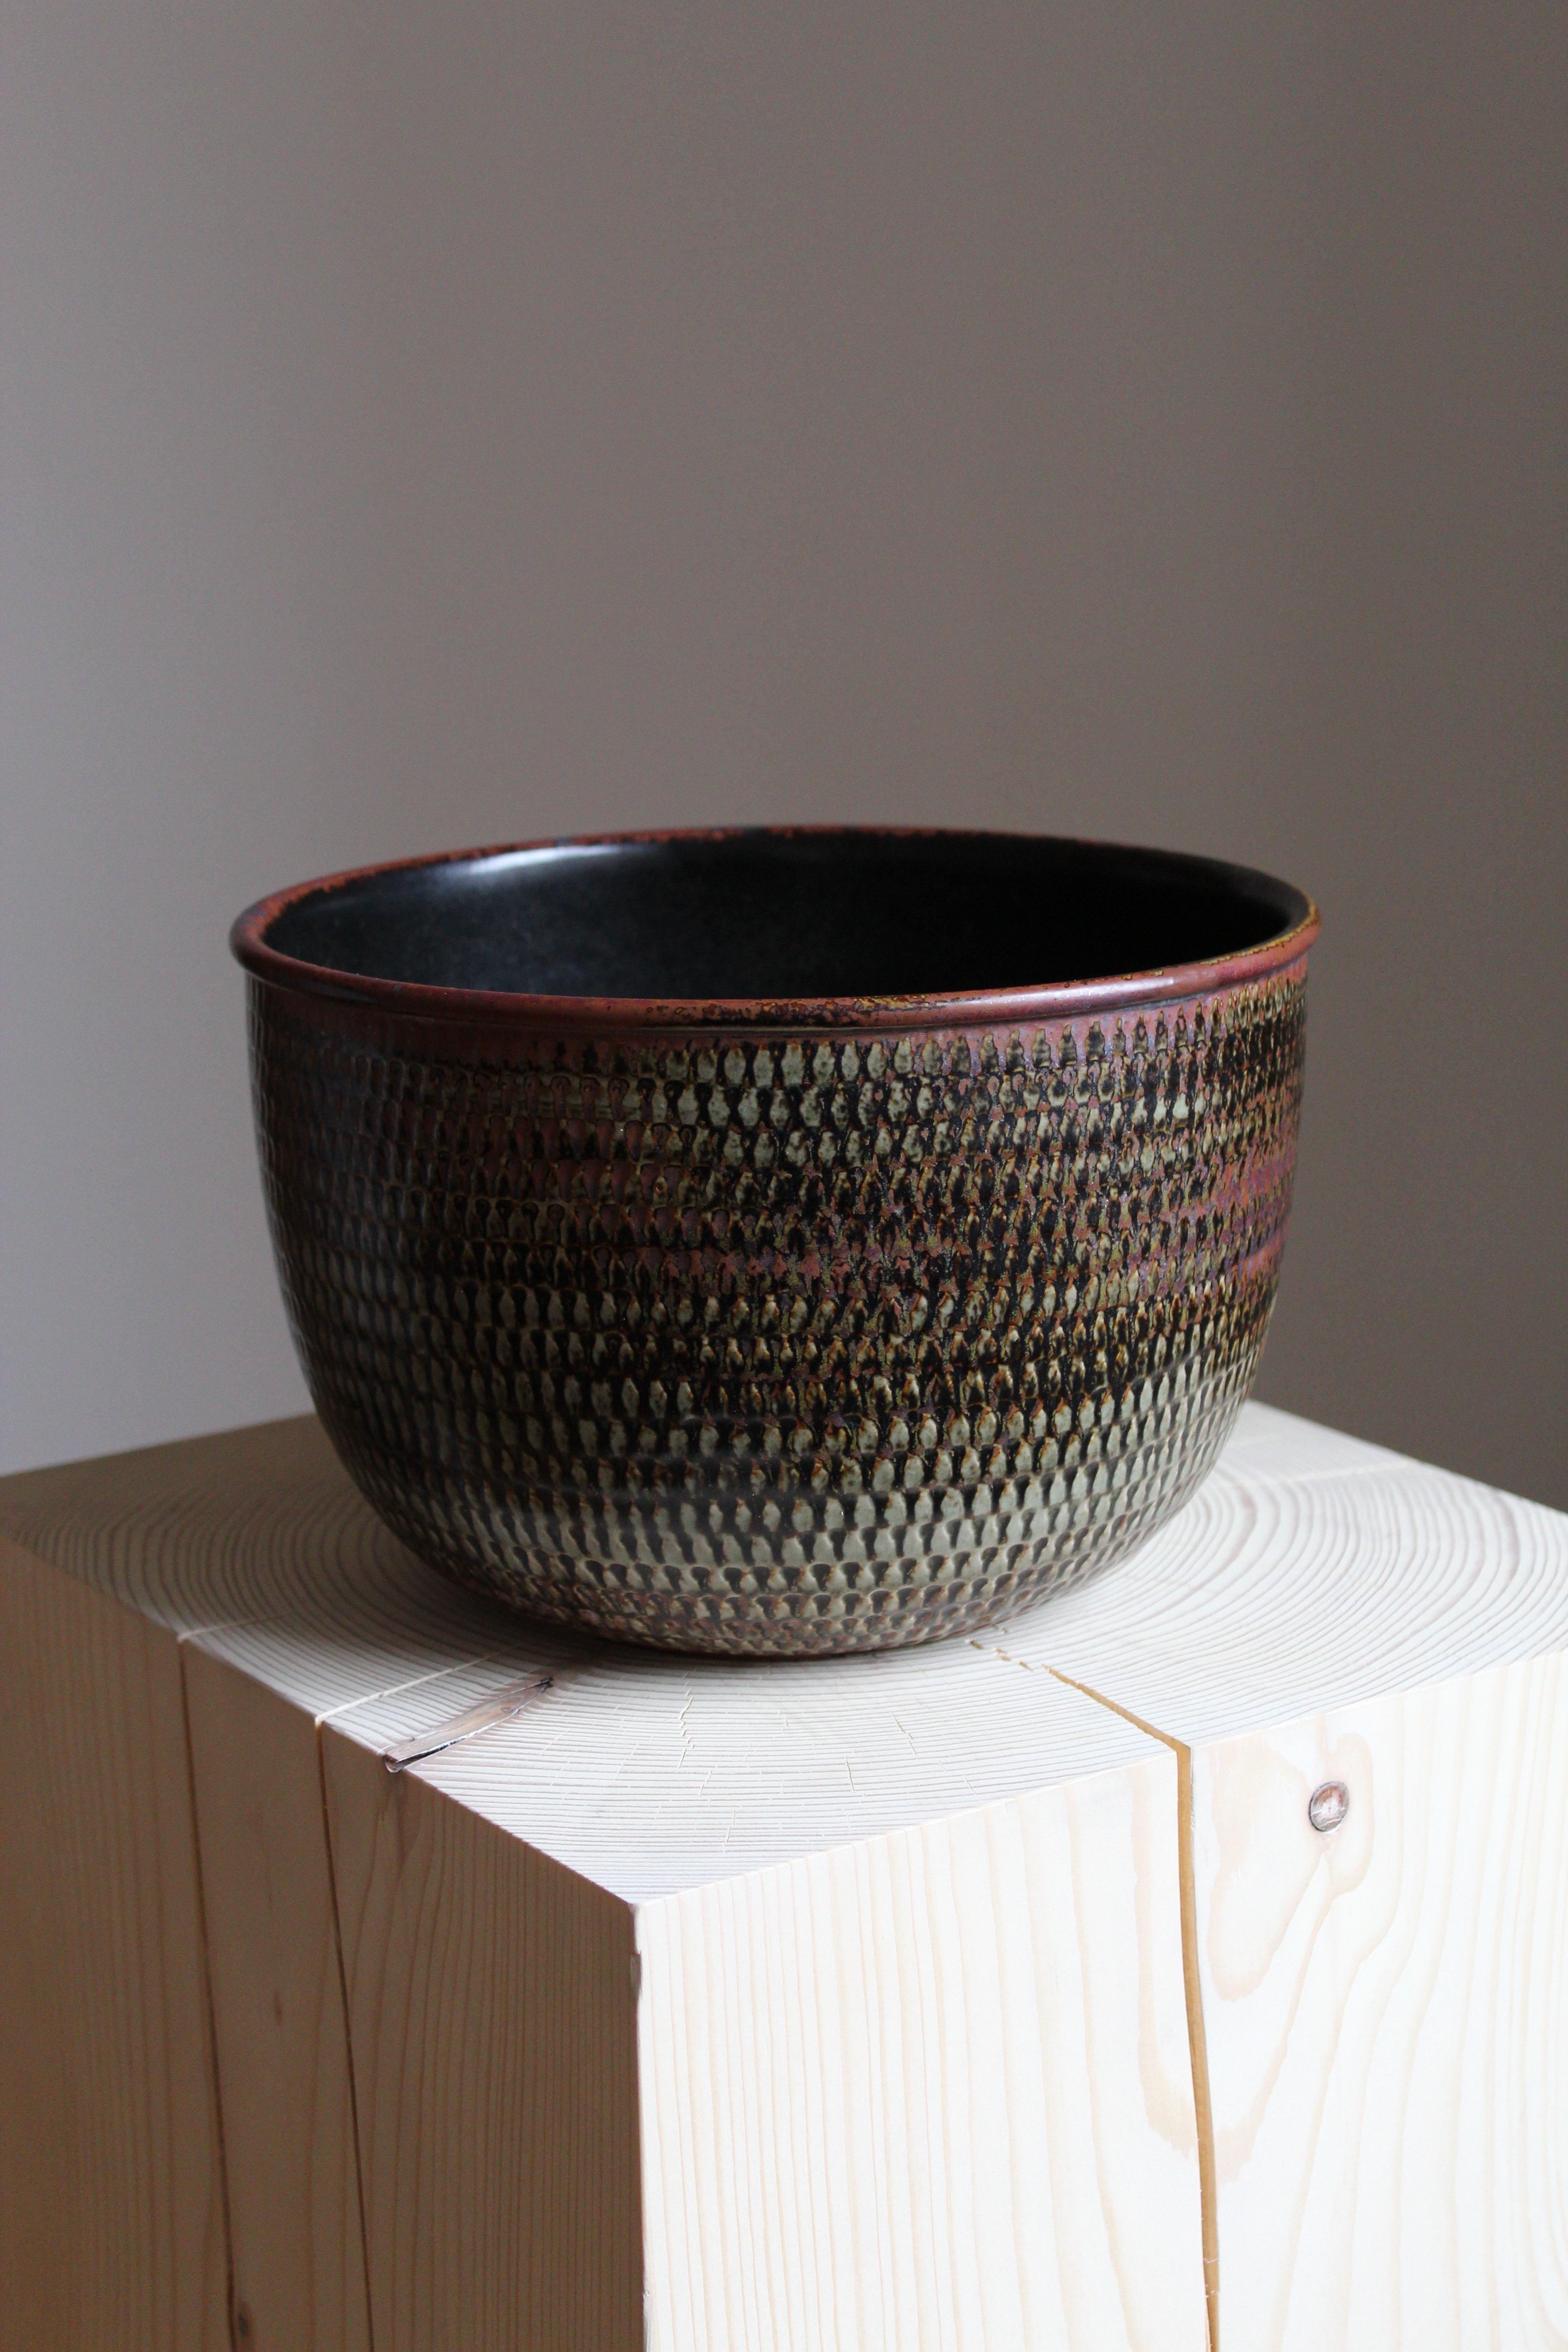 An unique sizable decorative bowl. Designed by Stig Lindberg, produced by Gustavsberg, 1960s. Features a highly complex and artistic glaze in Lindbergs signature style, signed and marked with the stylized hand, indicating it's a studio